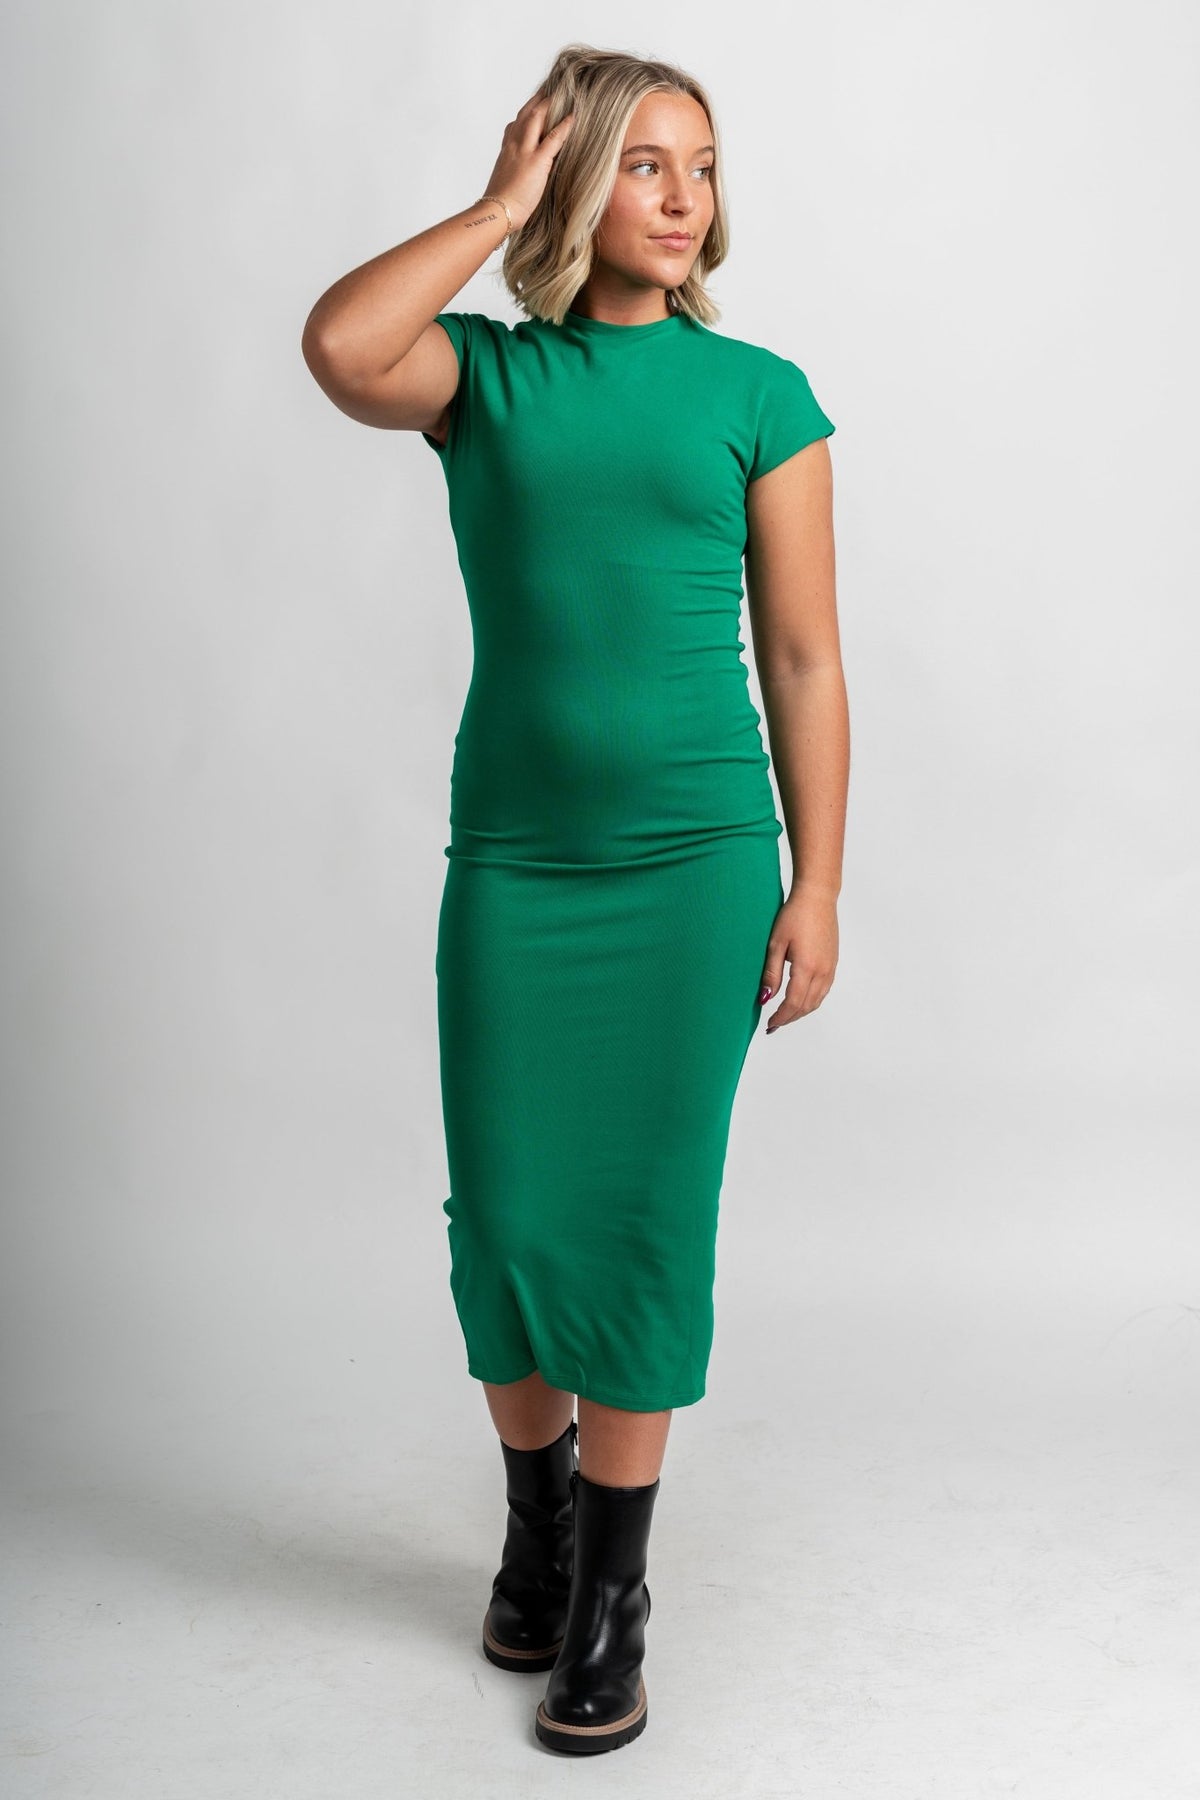 Ribbed midi dress green - Cute Dress - Trendy Dresses at Lush Fashion Lounge Boutique in Oklahoma City